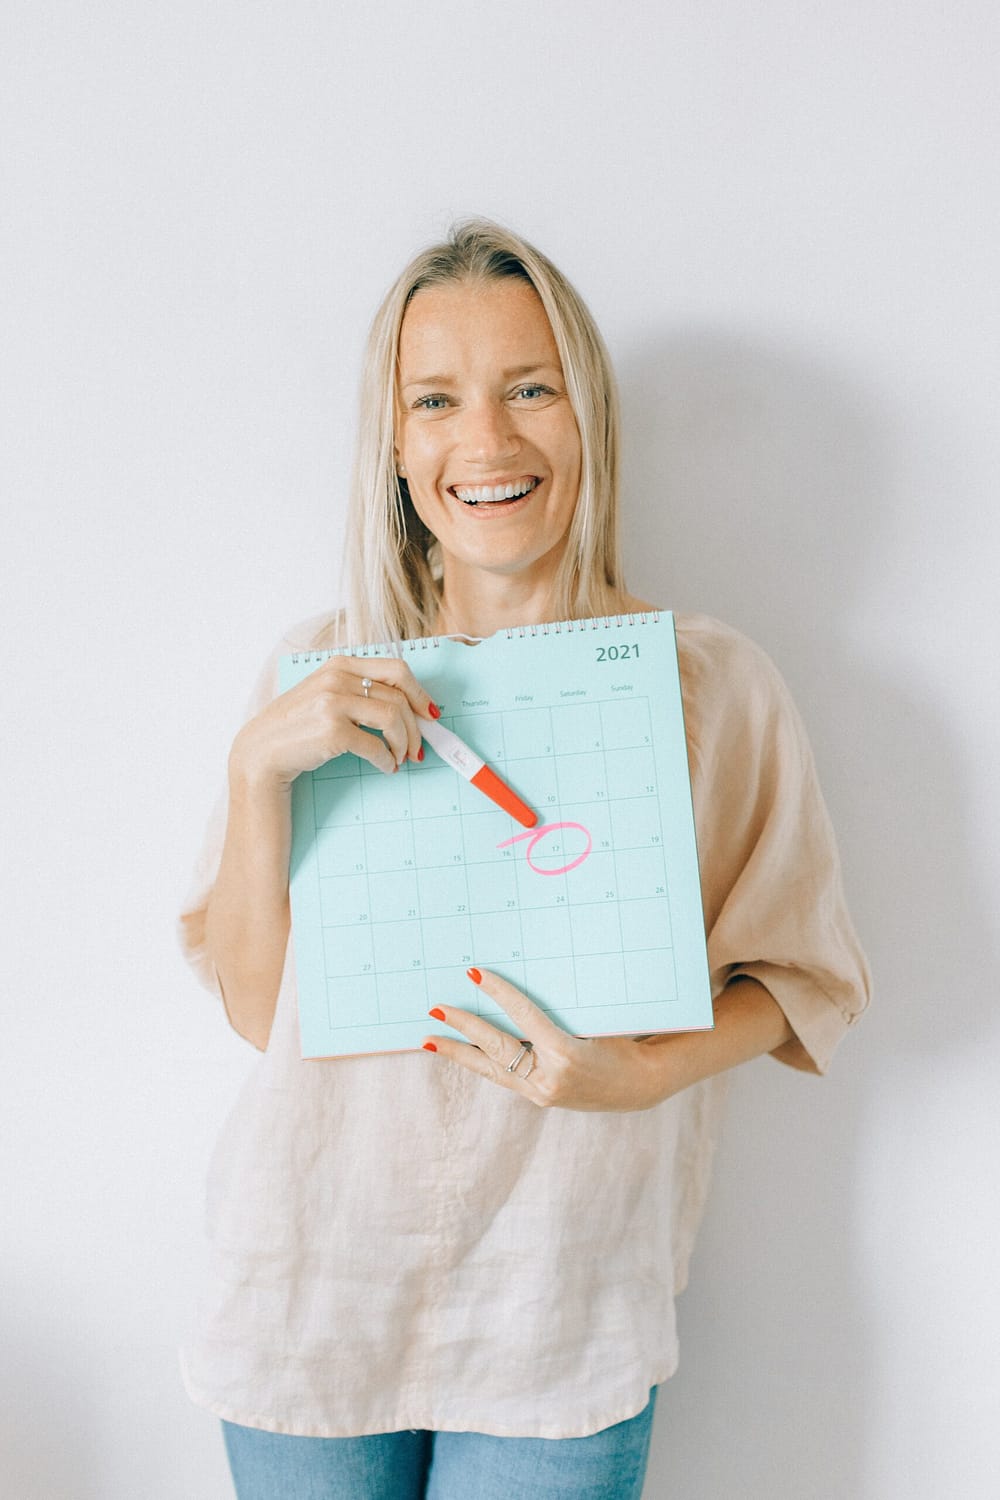 A woman standing with a pregnancy calendar